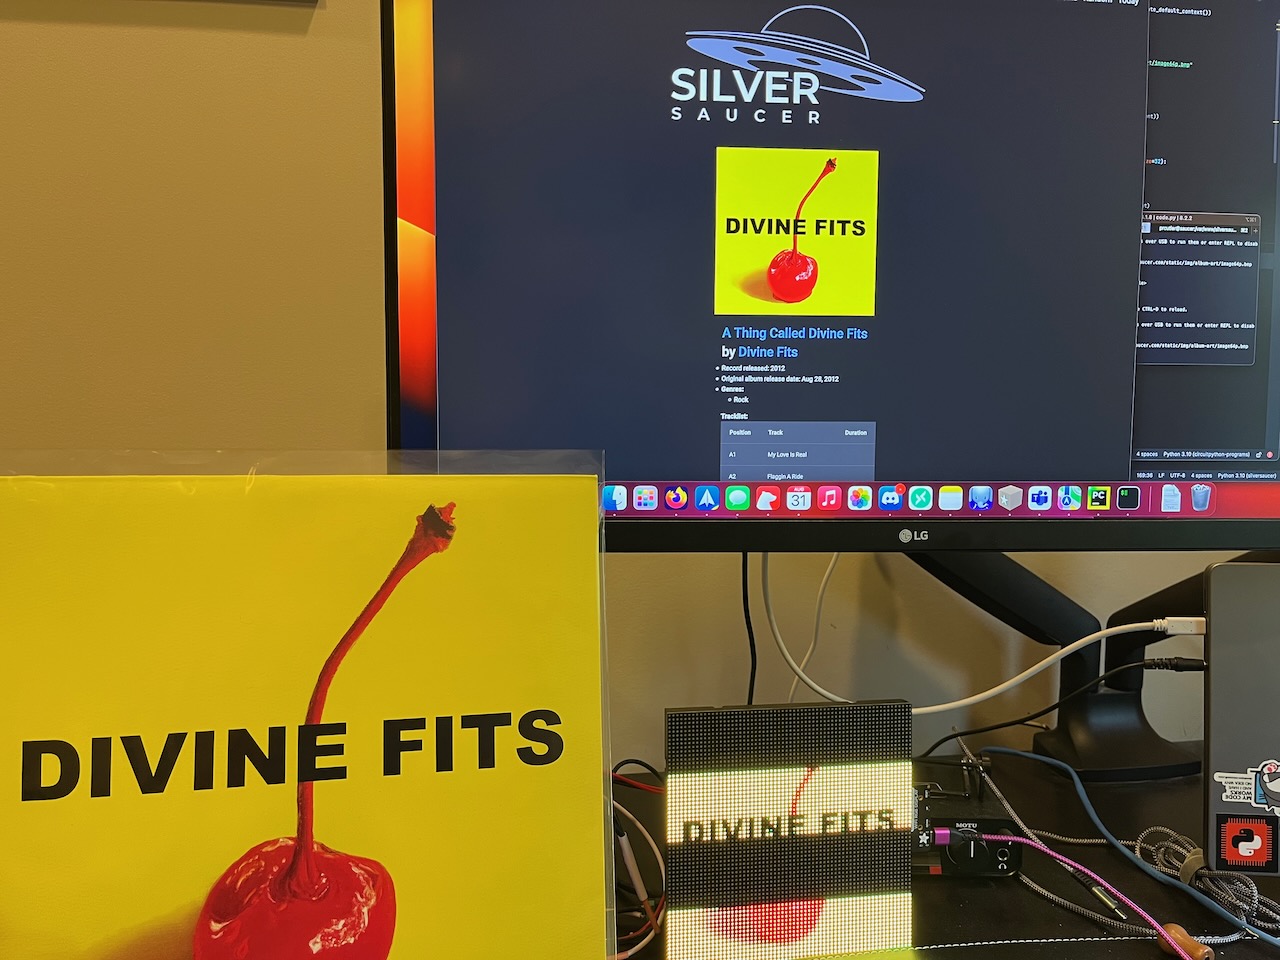 An album by Divine Fits, showing the album sleeve, the art on a computer screen and the same image on an RGB Matrix